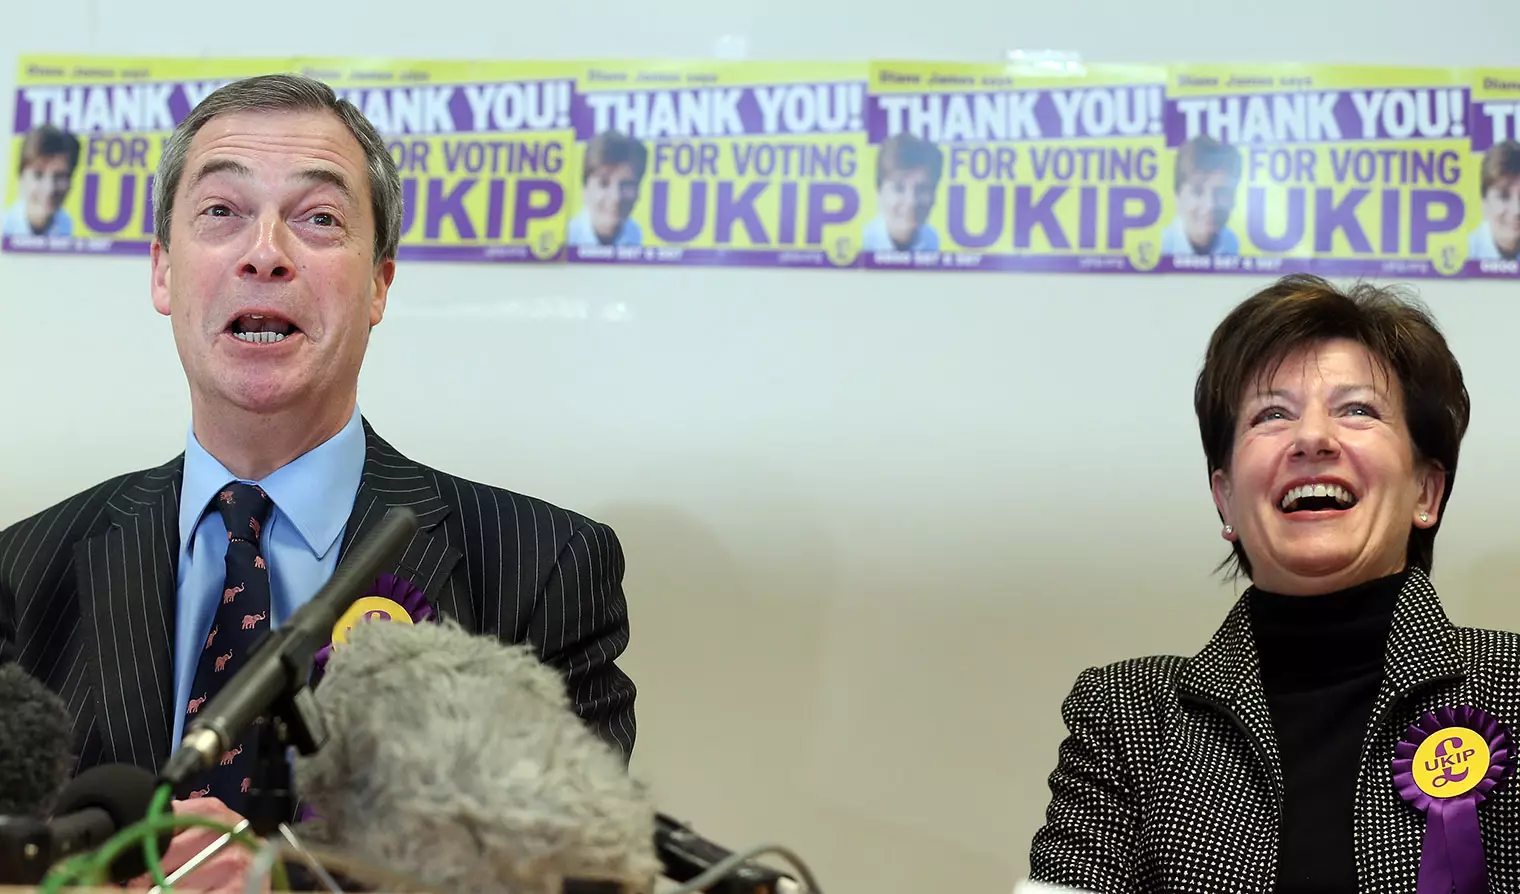 This Promotional UKIP Banner Is Getting In The Headlines For All The Wrong (Right) Reasons